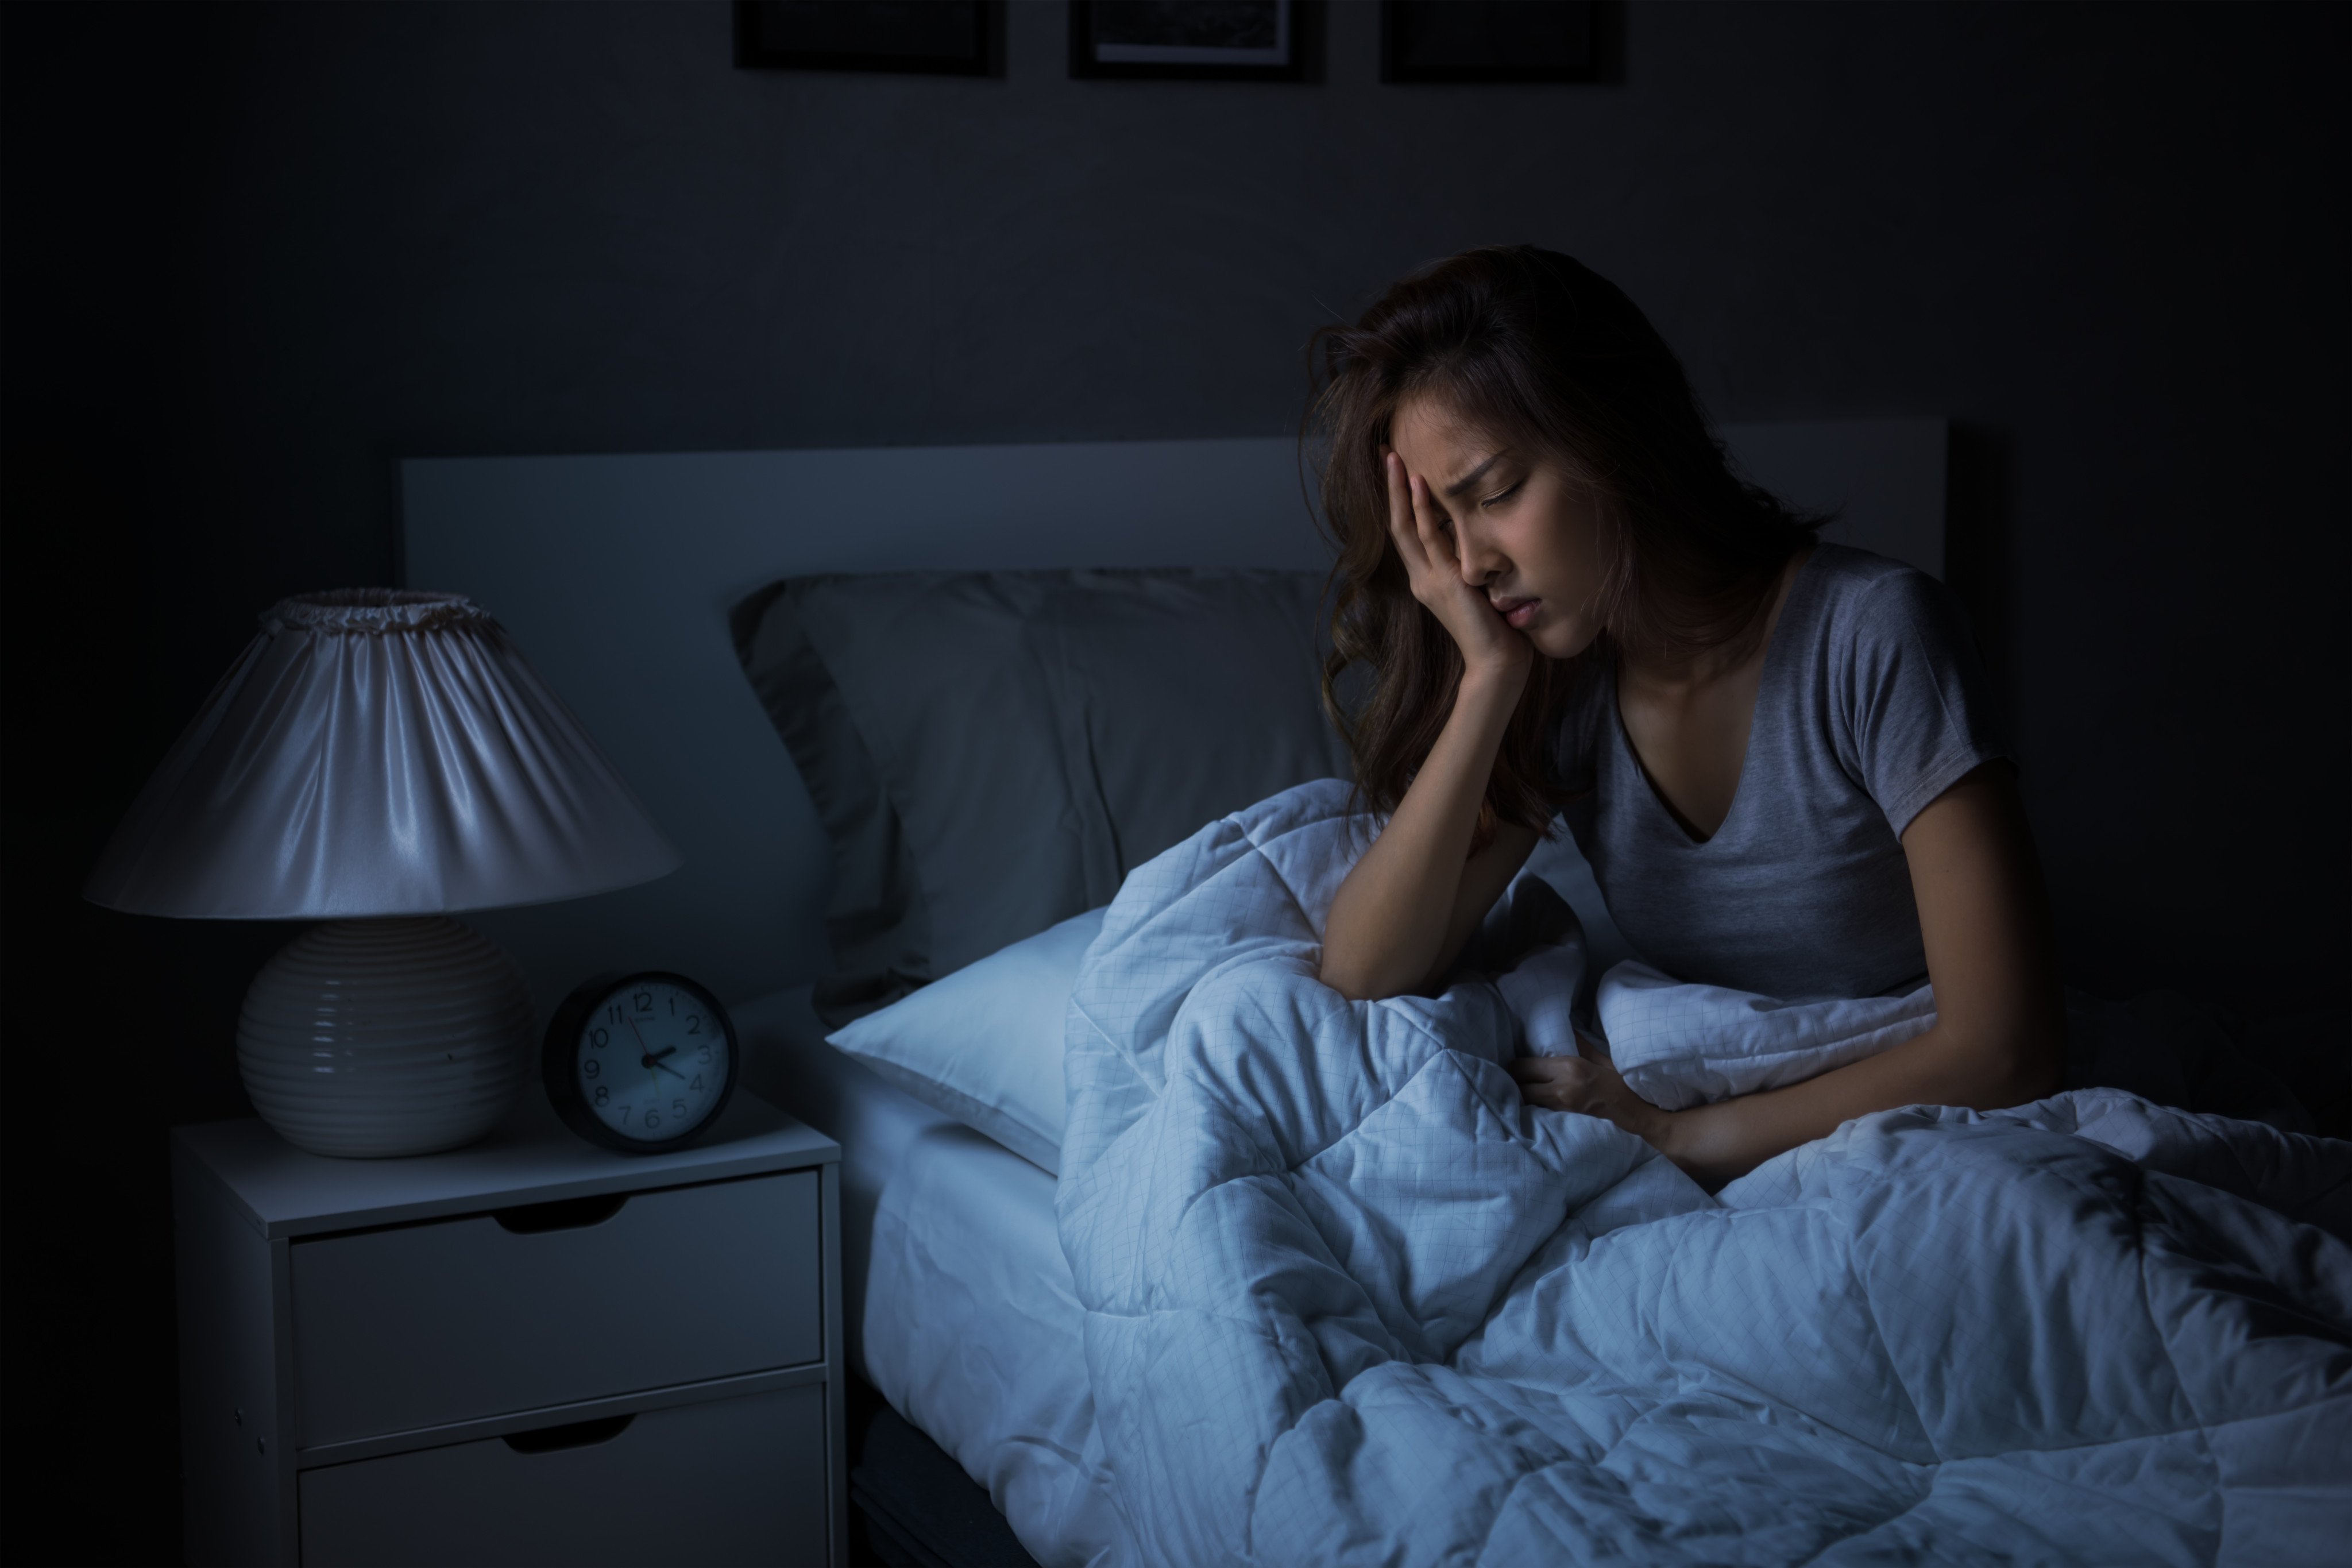 Sleep stress has become so endemic worldwide that millions trawl the internet daily in search of miracle solutions. Photo: Shutterstock